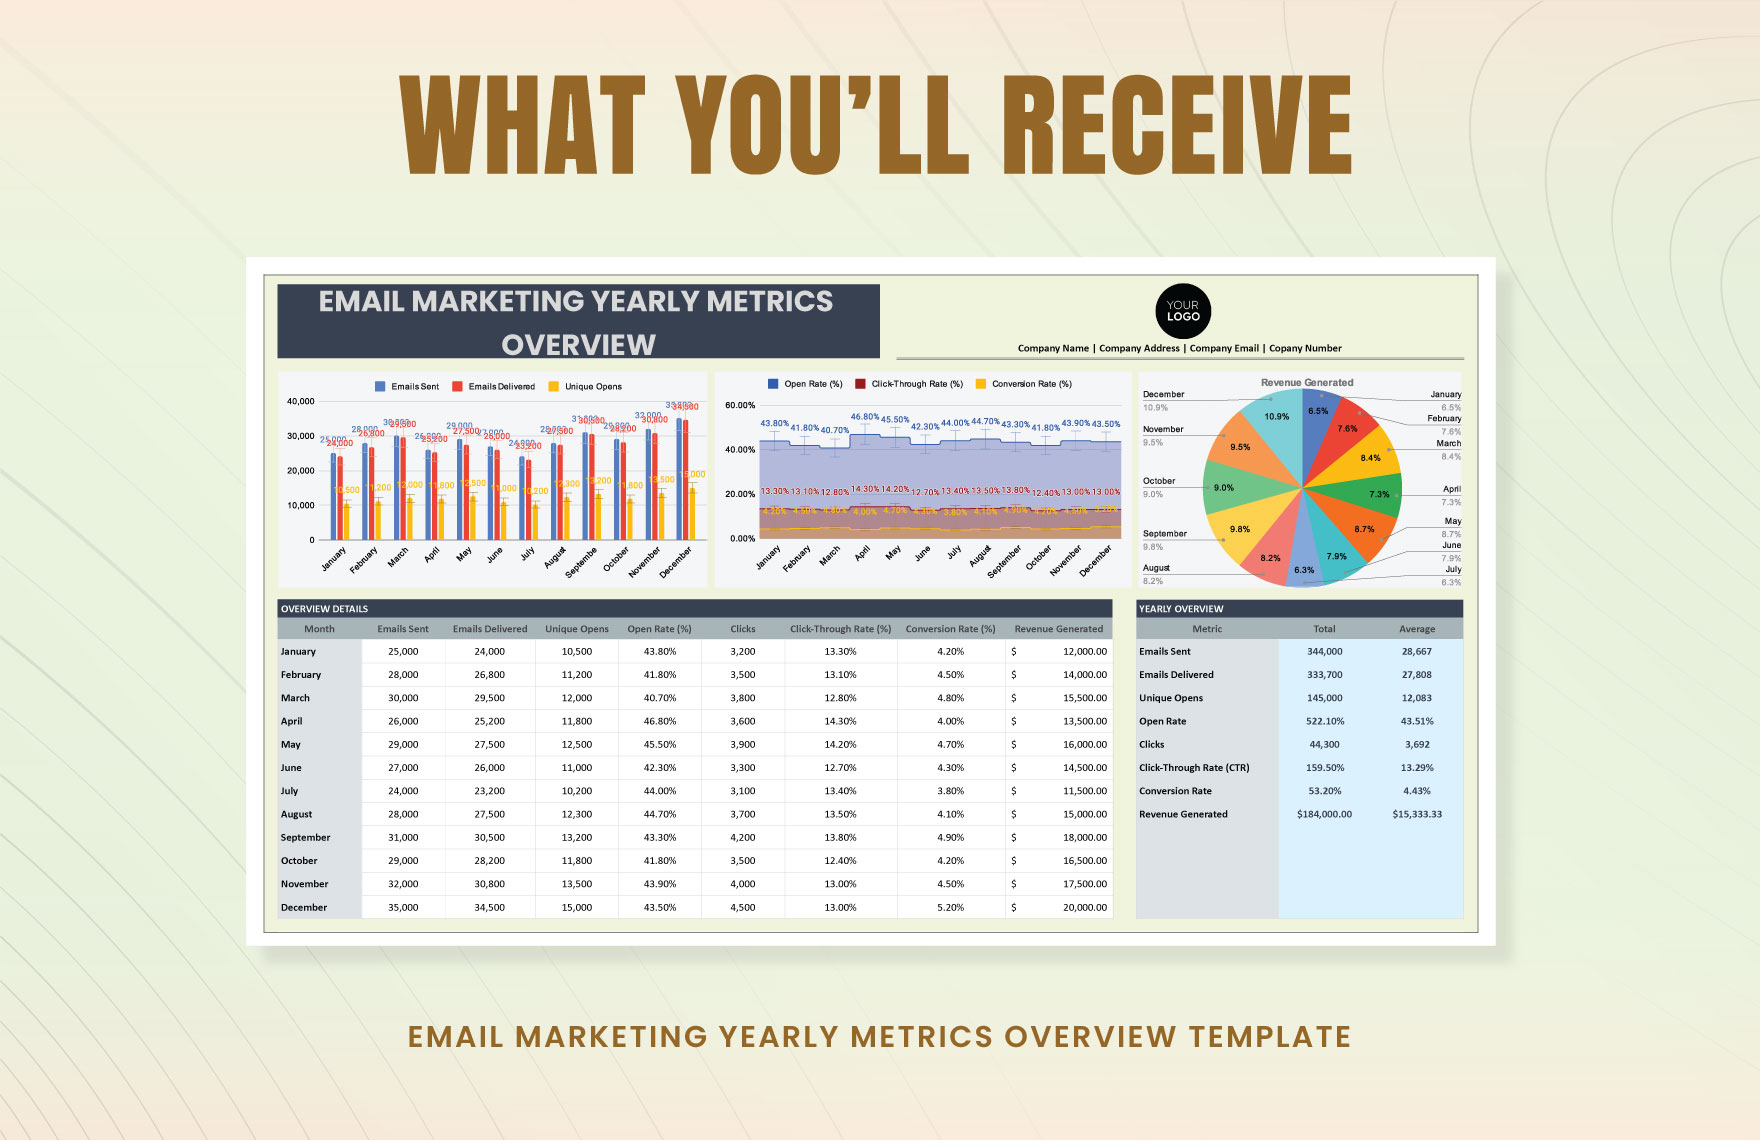 Email Marketing Yearly Metrics Overview Template